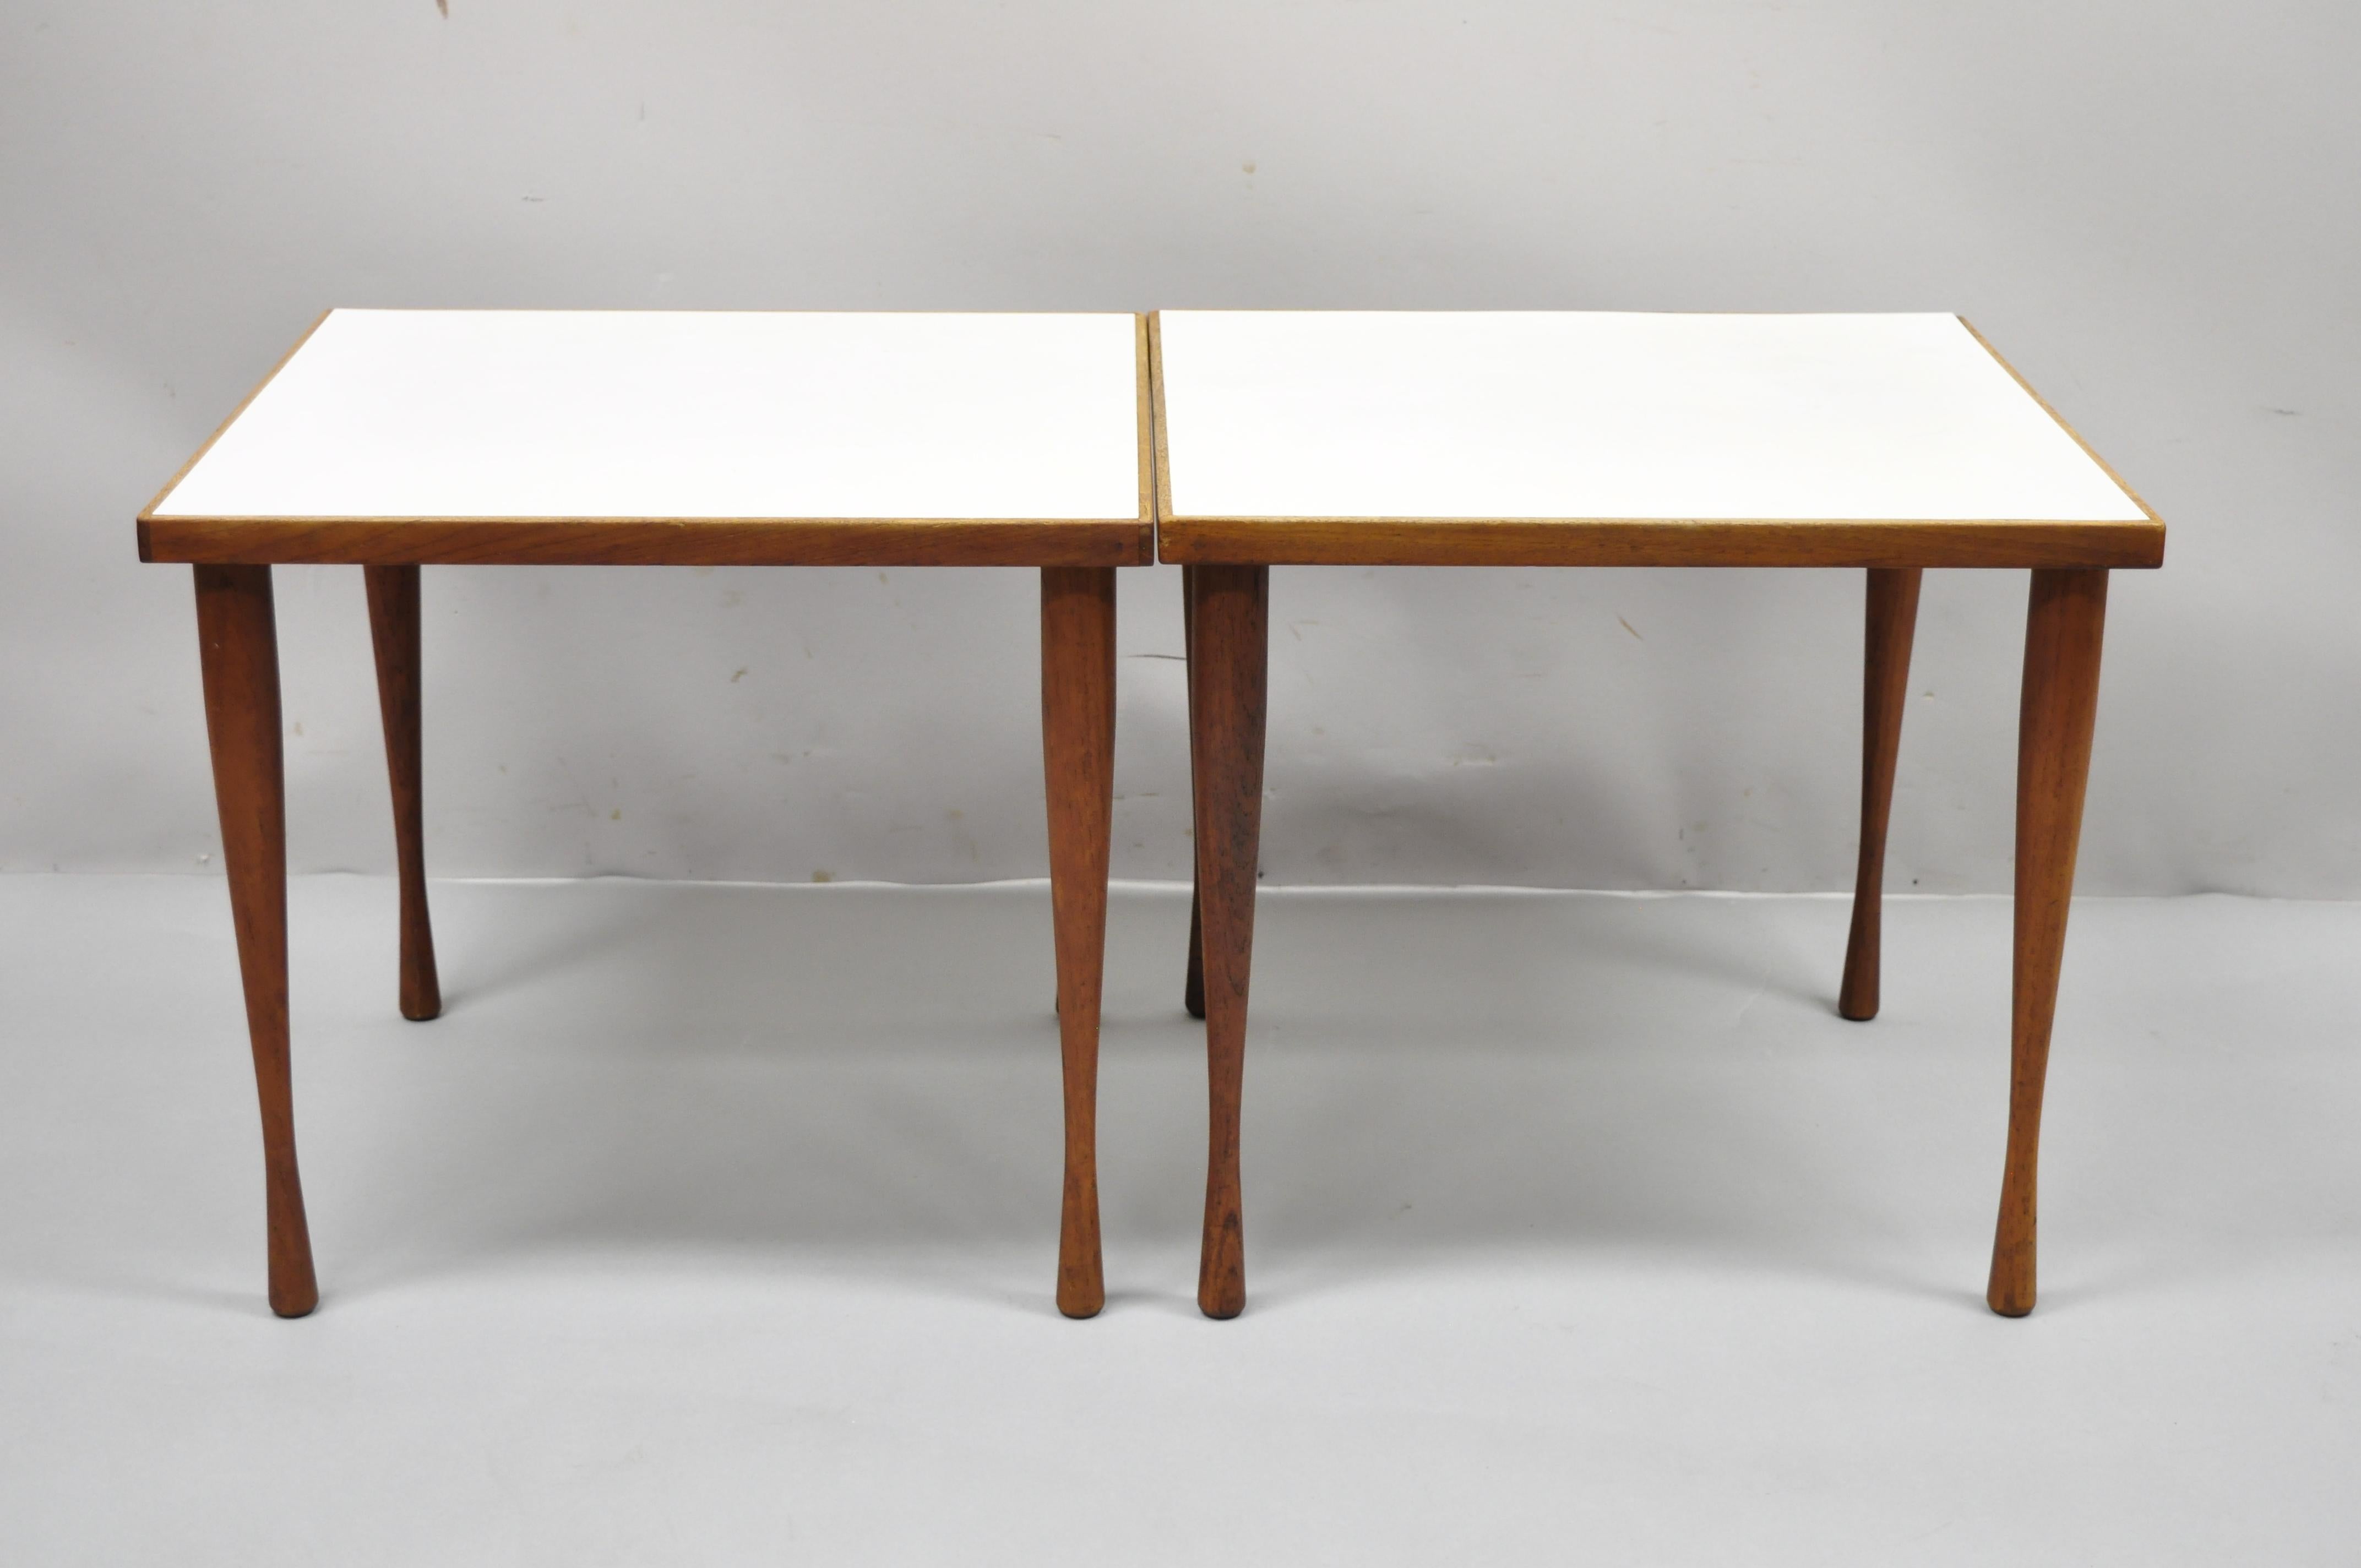 Hans C. Andersen teak wood white Formica tapered hour glass leg snack side tables - a pair. Item features hour glass teak wood tapered legs, white Formica top, beautiful wood grain, original label, clean modernist lines, great style and form, Circa